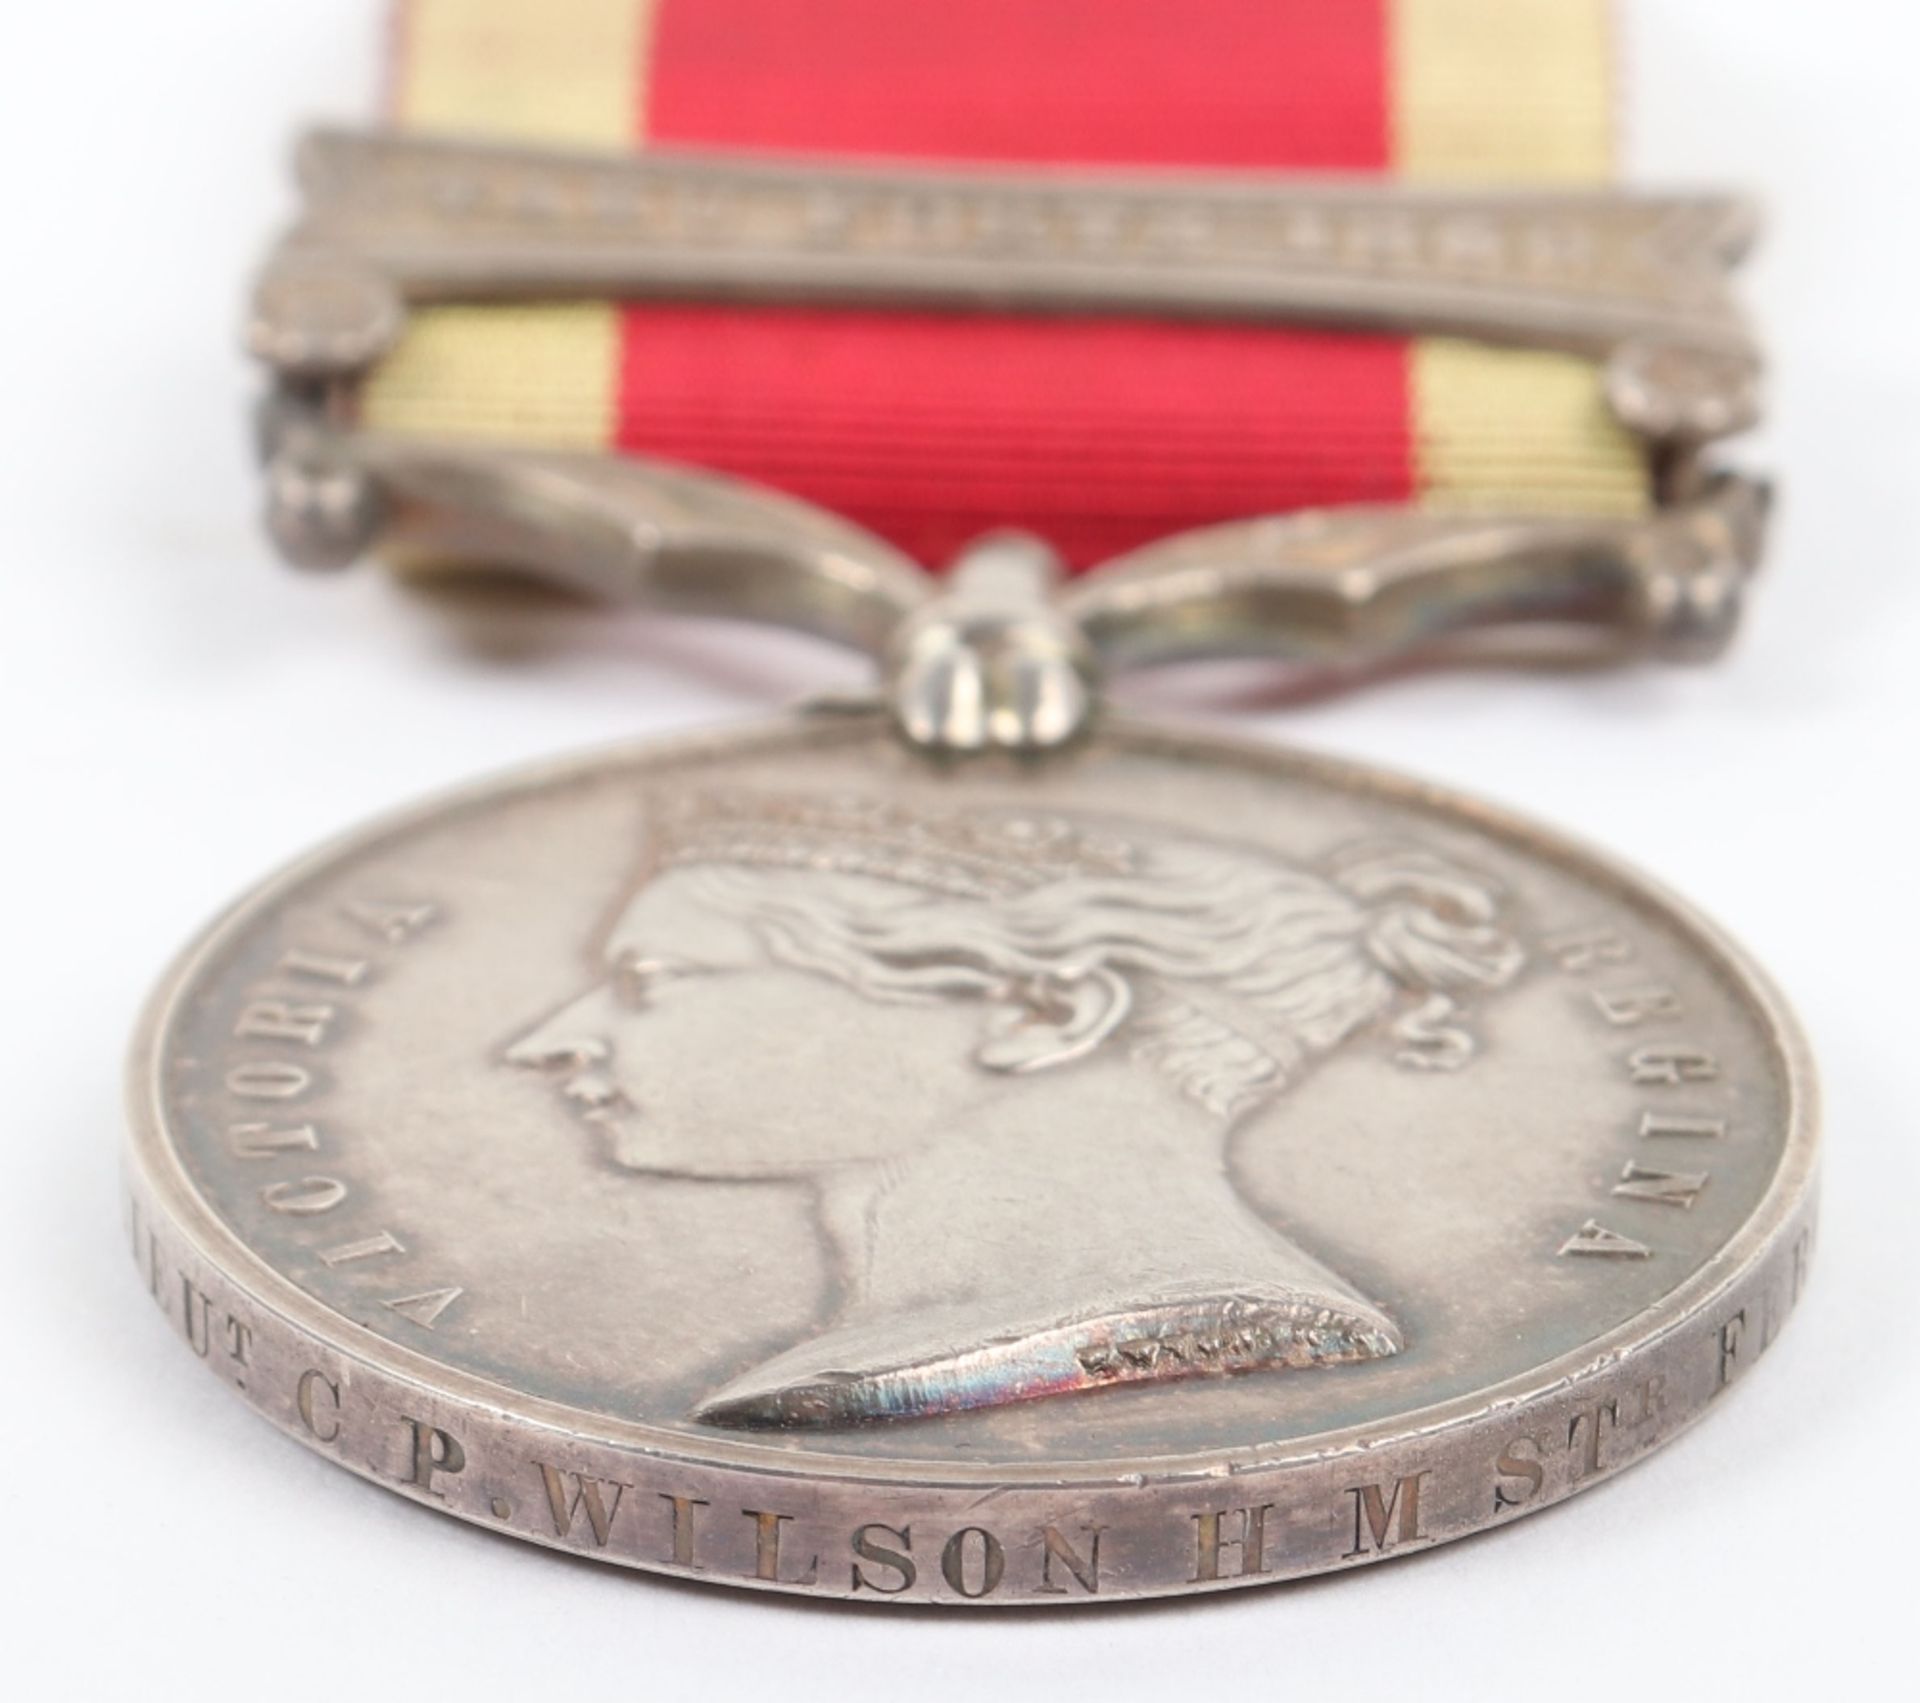 Victorian 2nd China War 1857-60 Medal Acting Lieutenant HM Steam Frigate Ferooz Indian Navy - Image 4 of 6